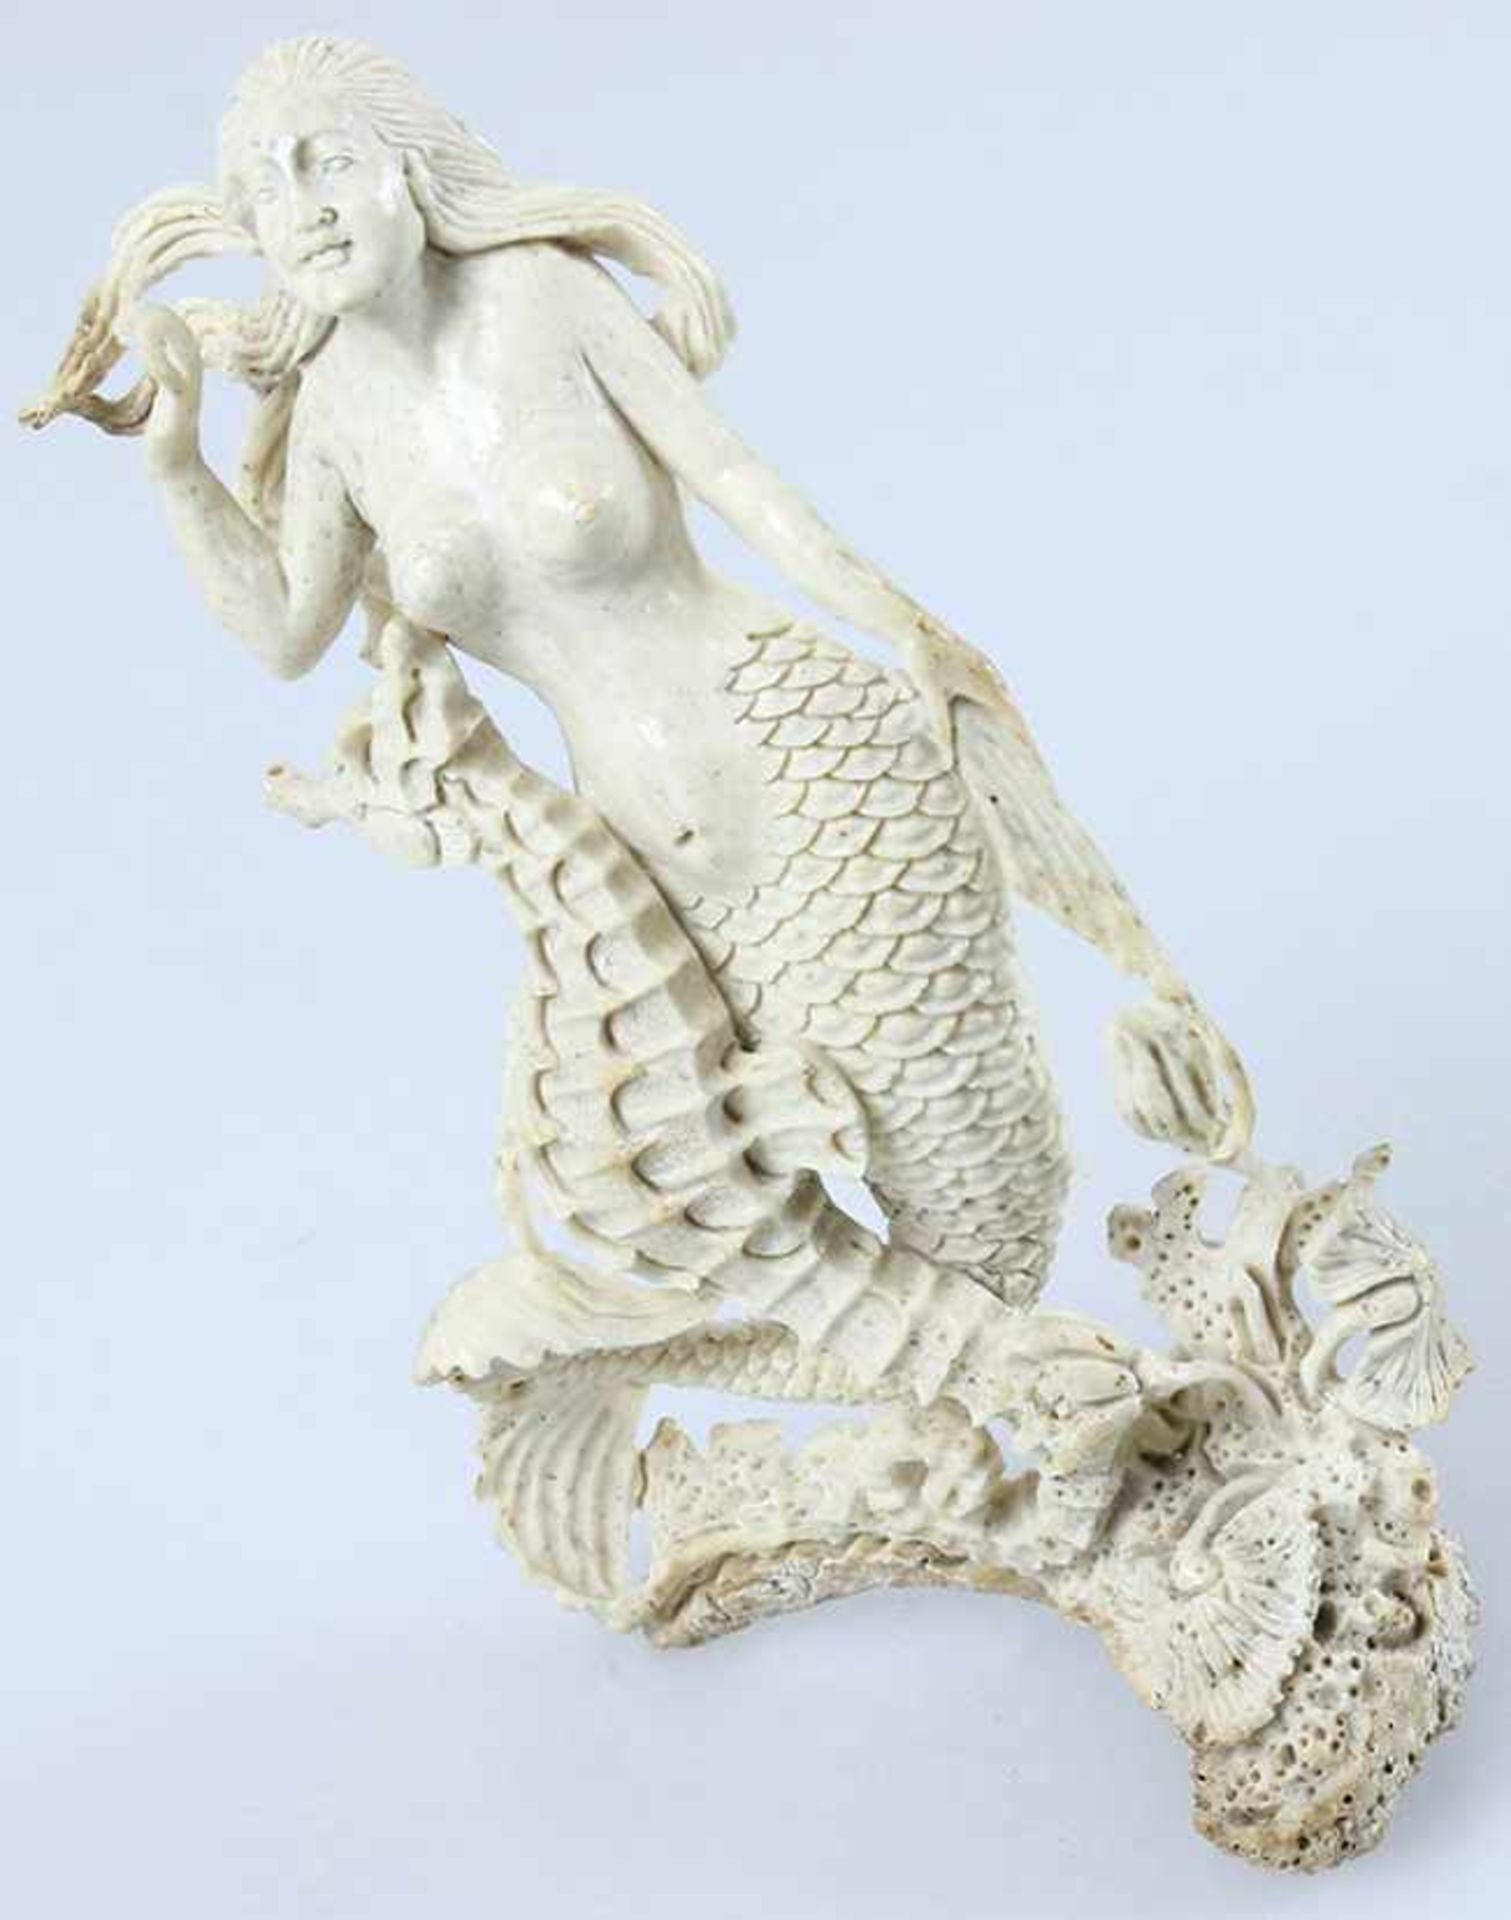 A stunning carved Mermaid with a seahorse at her side. Watch her fishy skin, real craftmanship!